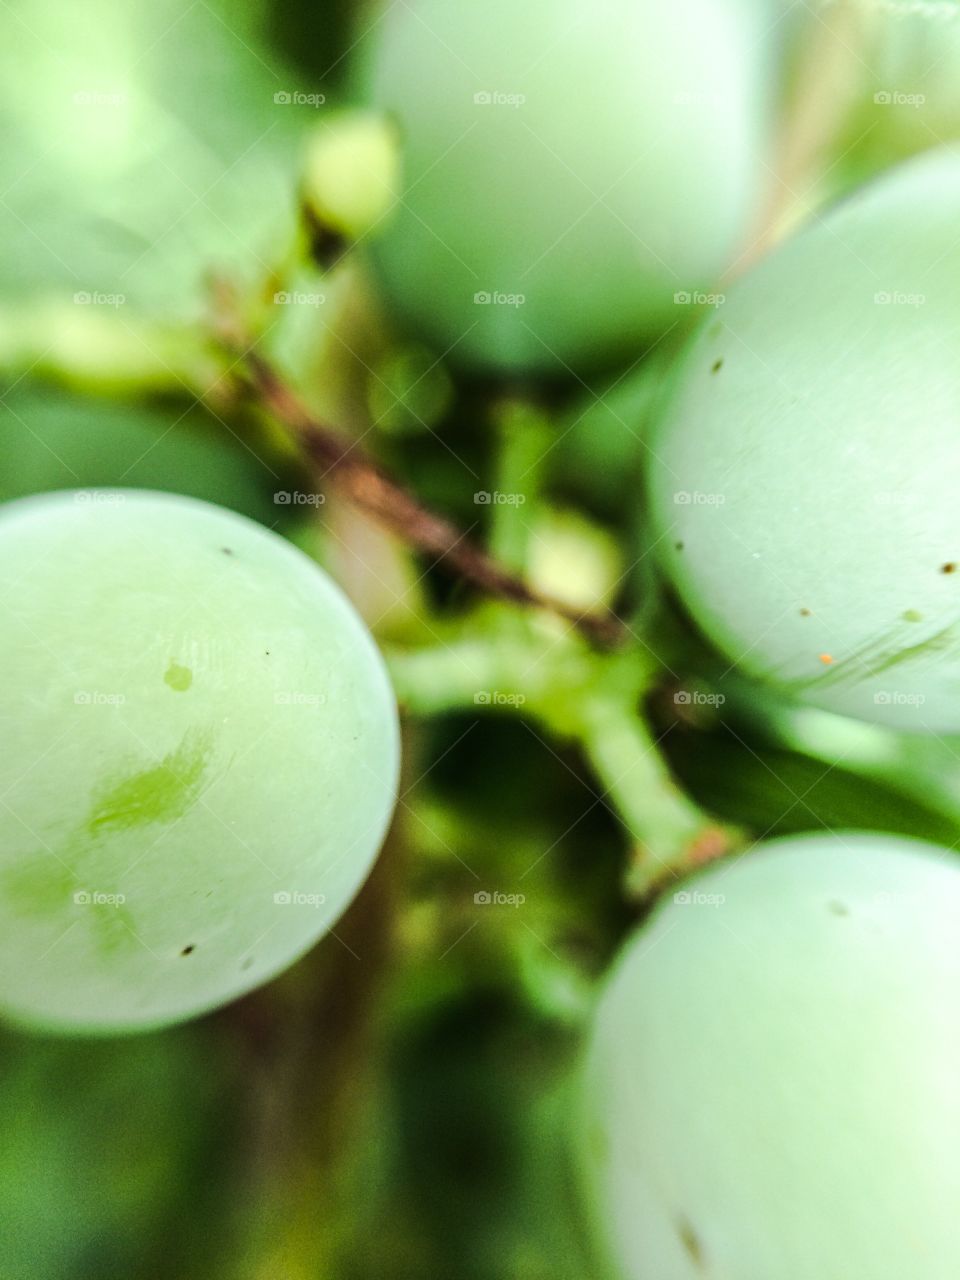 Grapes on the vine. 